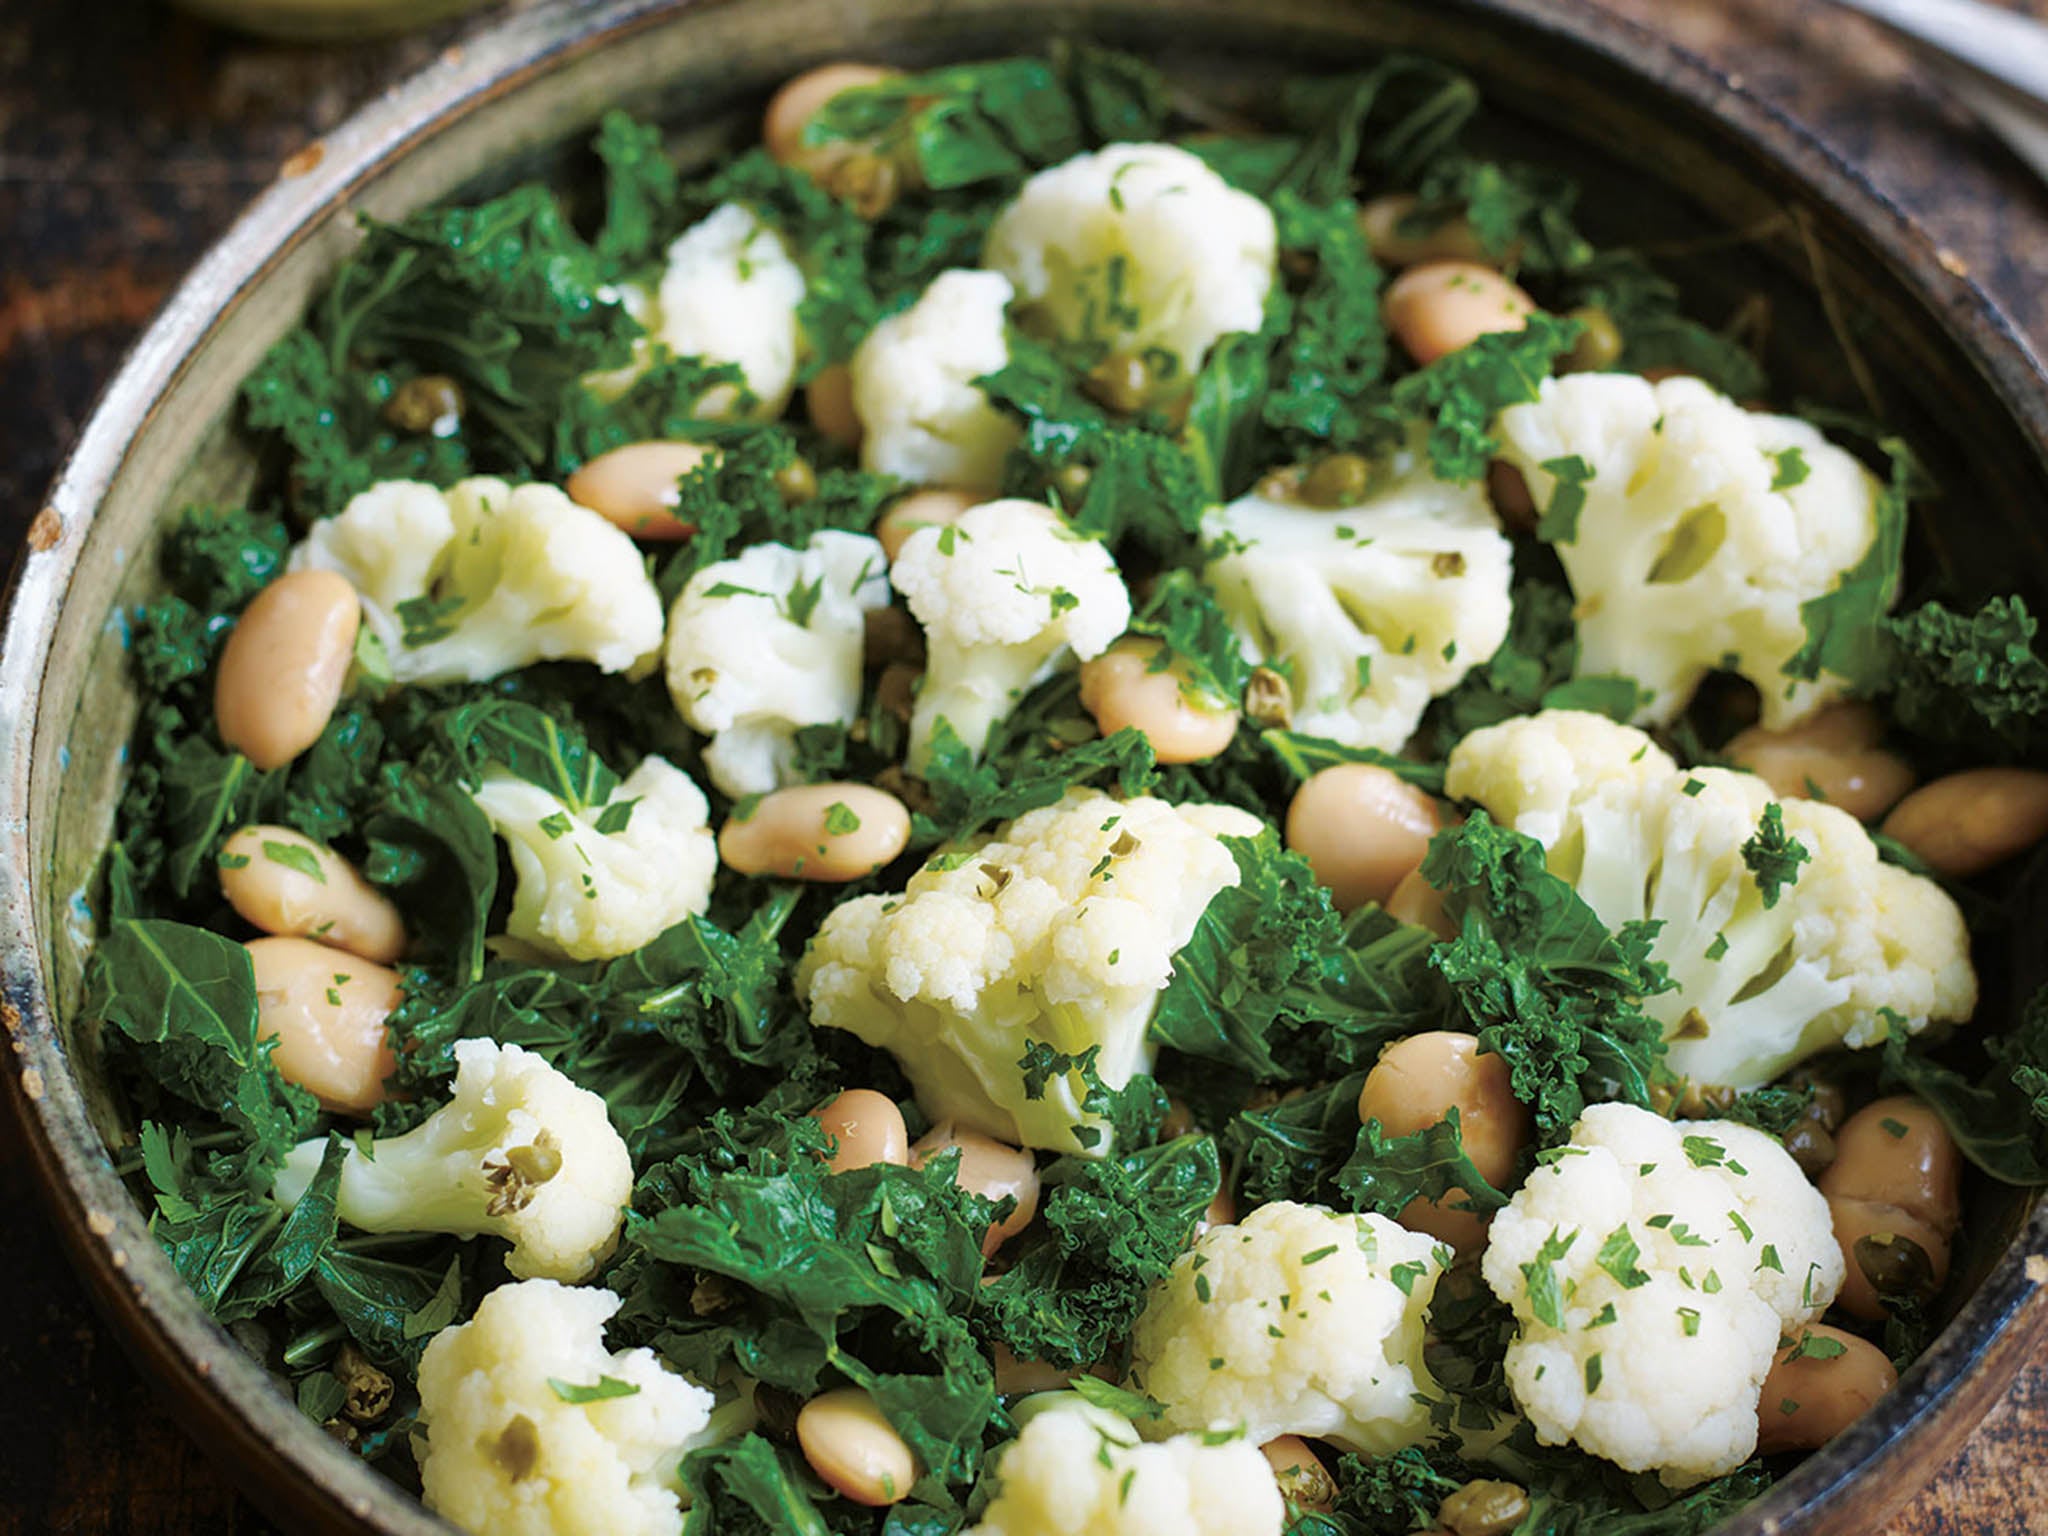 Hearty yet healthy, cauliflower and kale both contain many nutrients